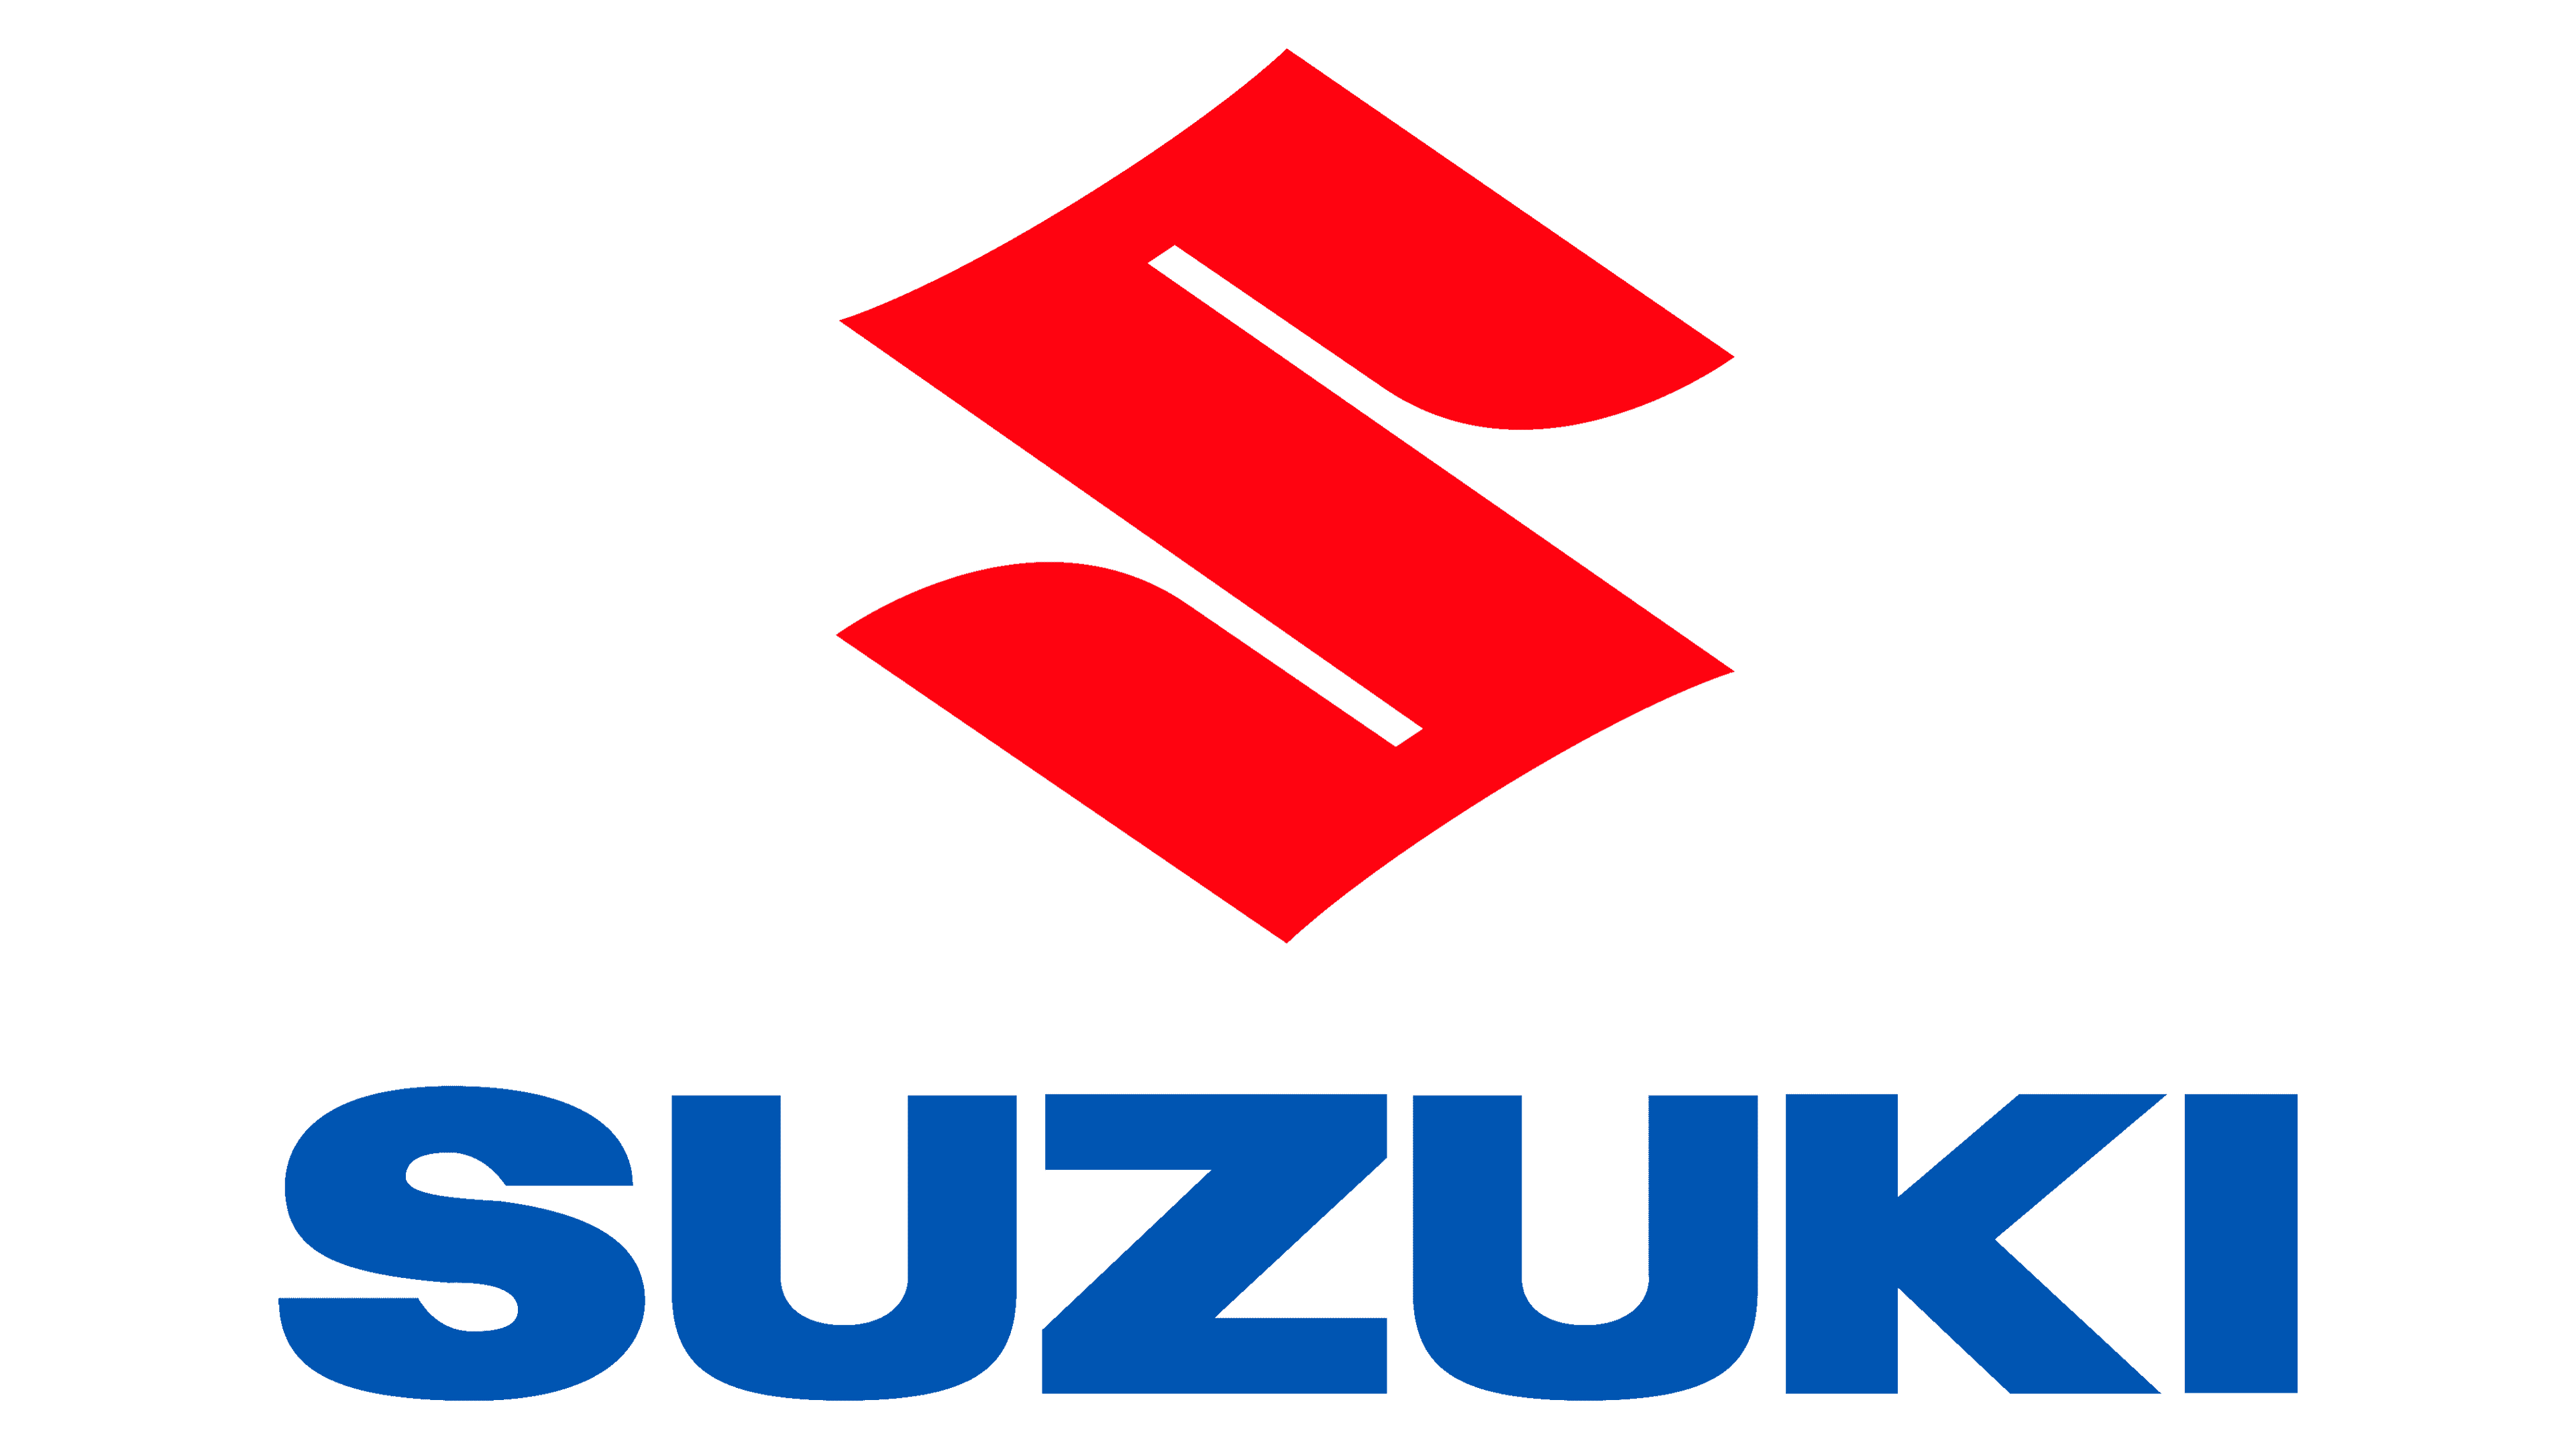 Suzuki Ends Quiet Asking Head of the state Not to Expand Assessments